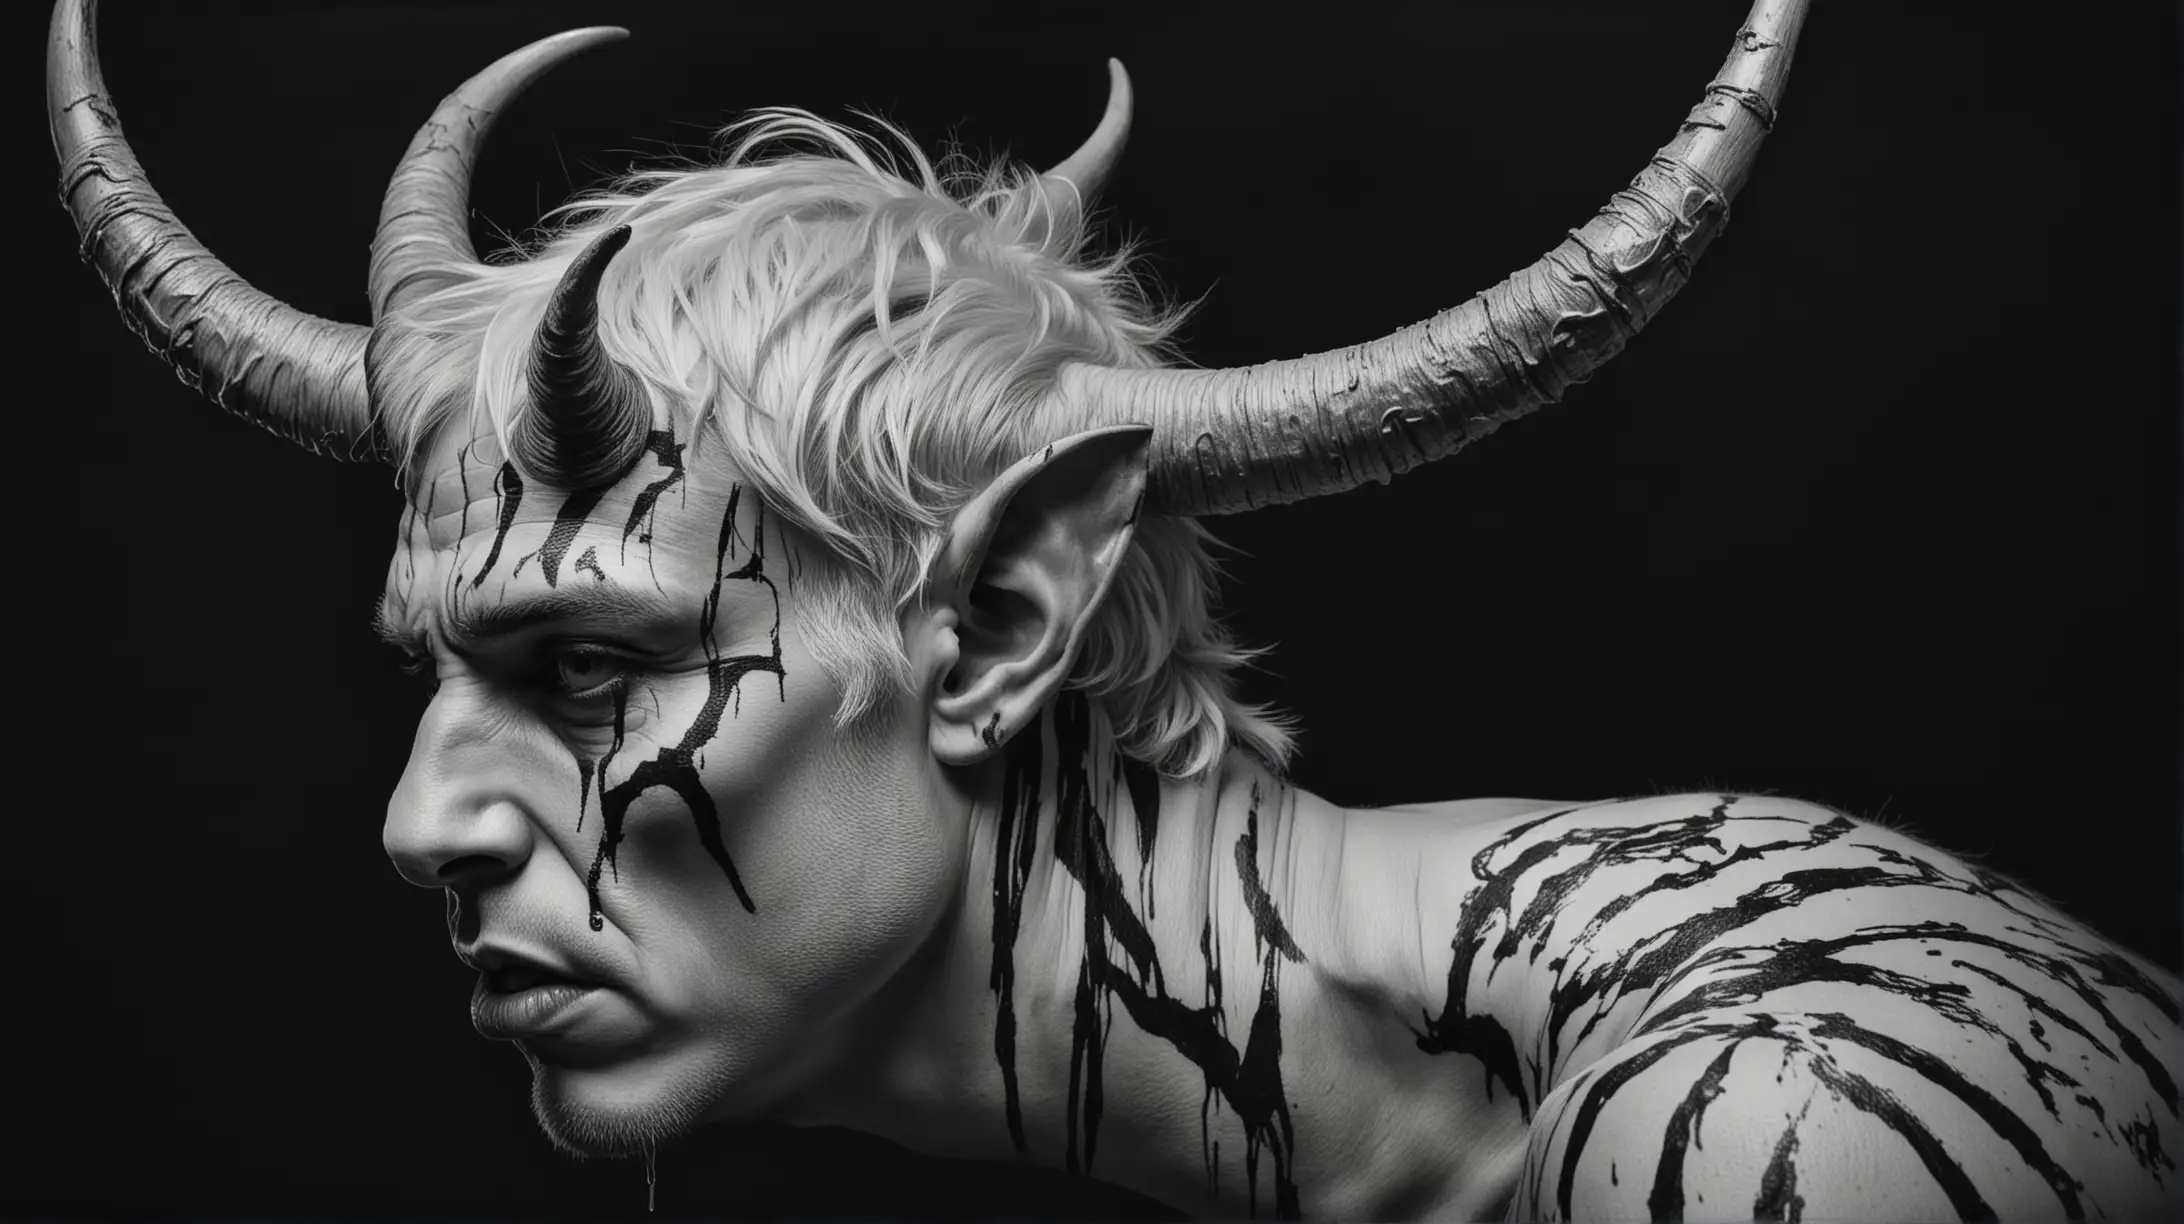 Dark Portrait of a Devilish Young Man with Horns in Black and White